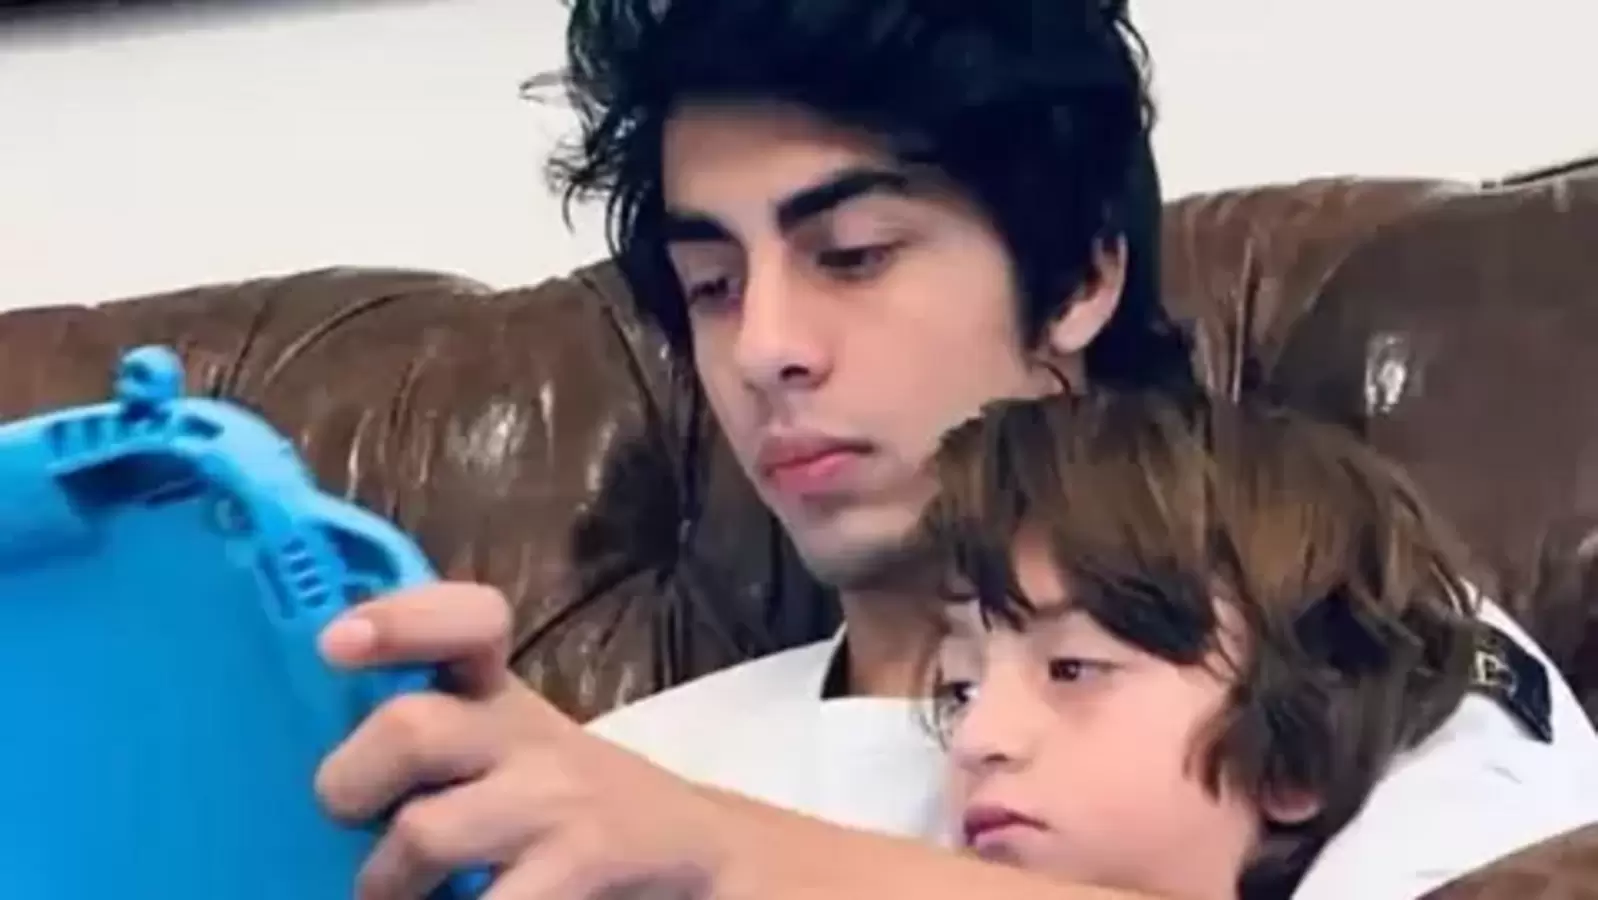 As Aryan Khan gets clean chit from NCB, Shah Rukh Khan fans say it’s ‘perfect birthday gift’ for brother AbRam Khan